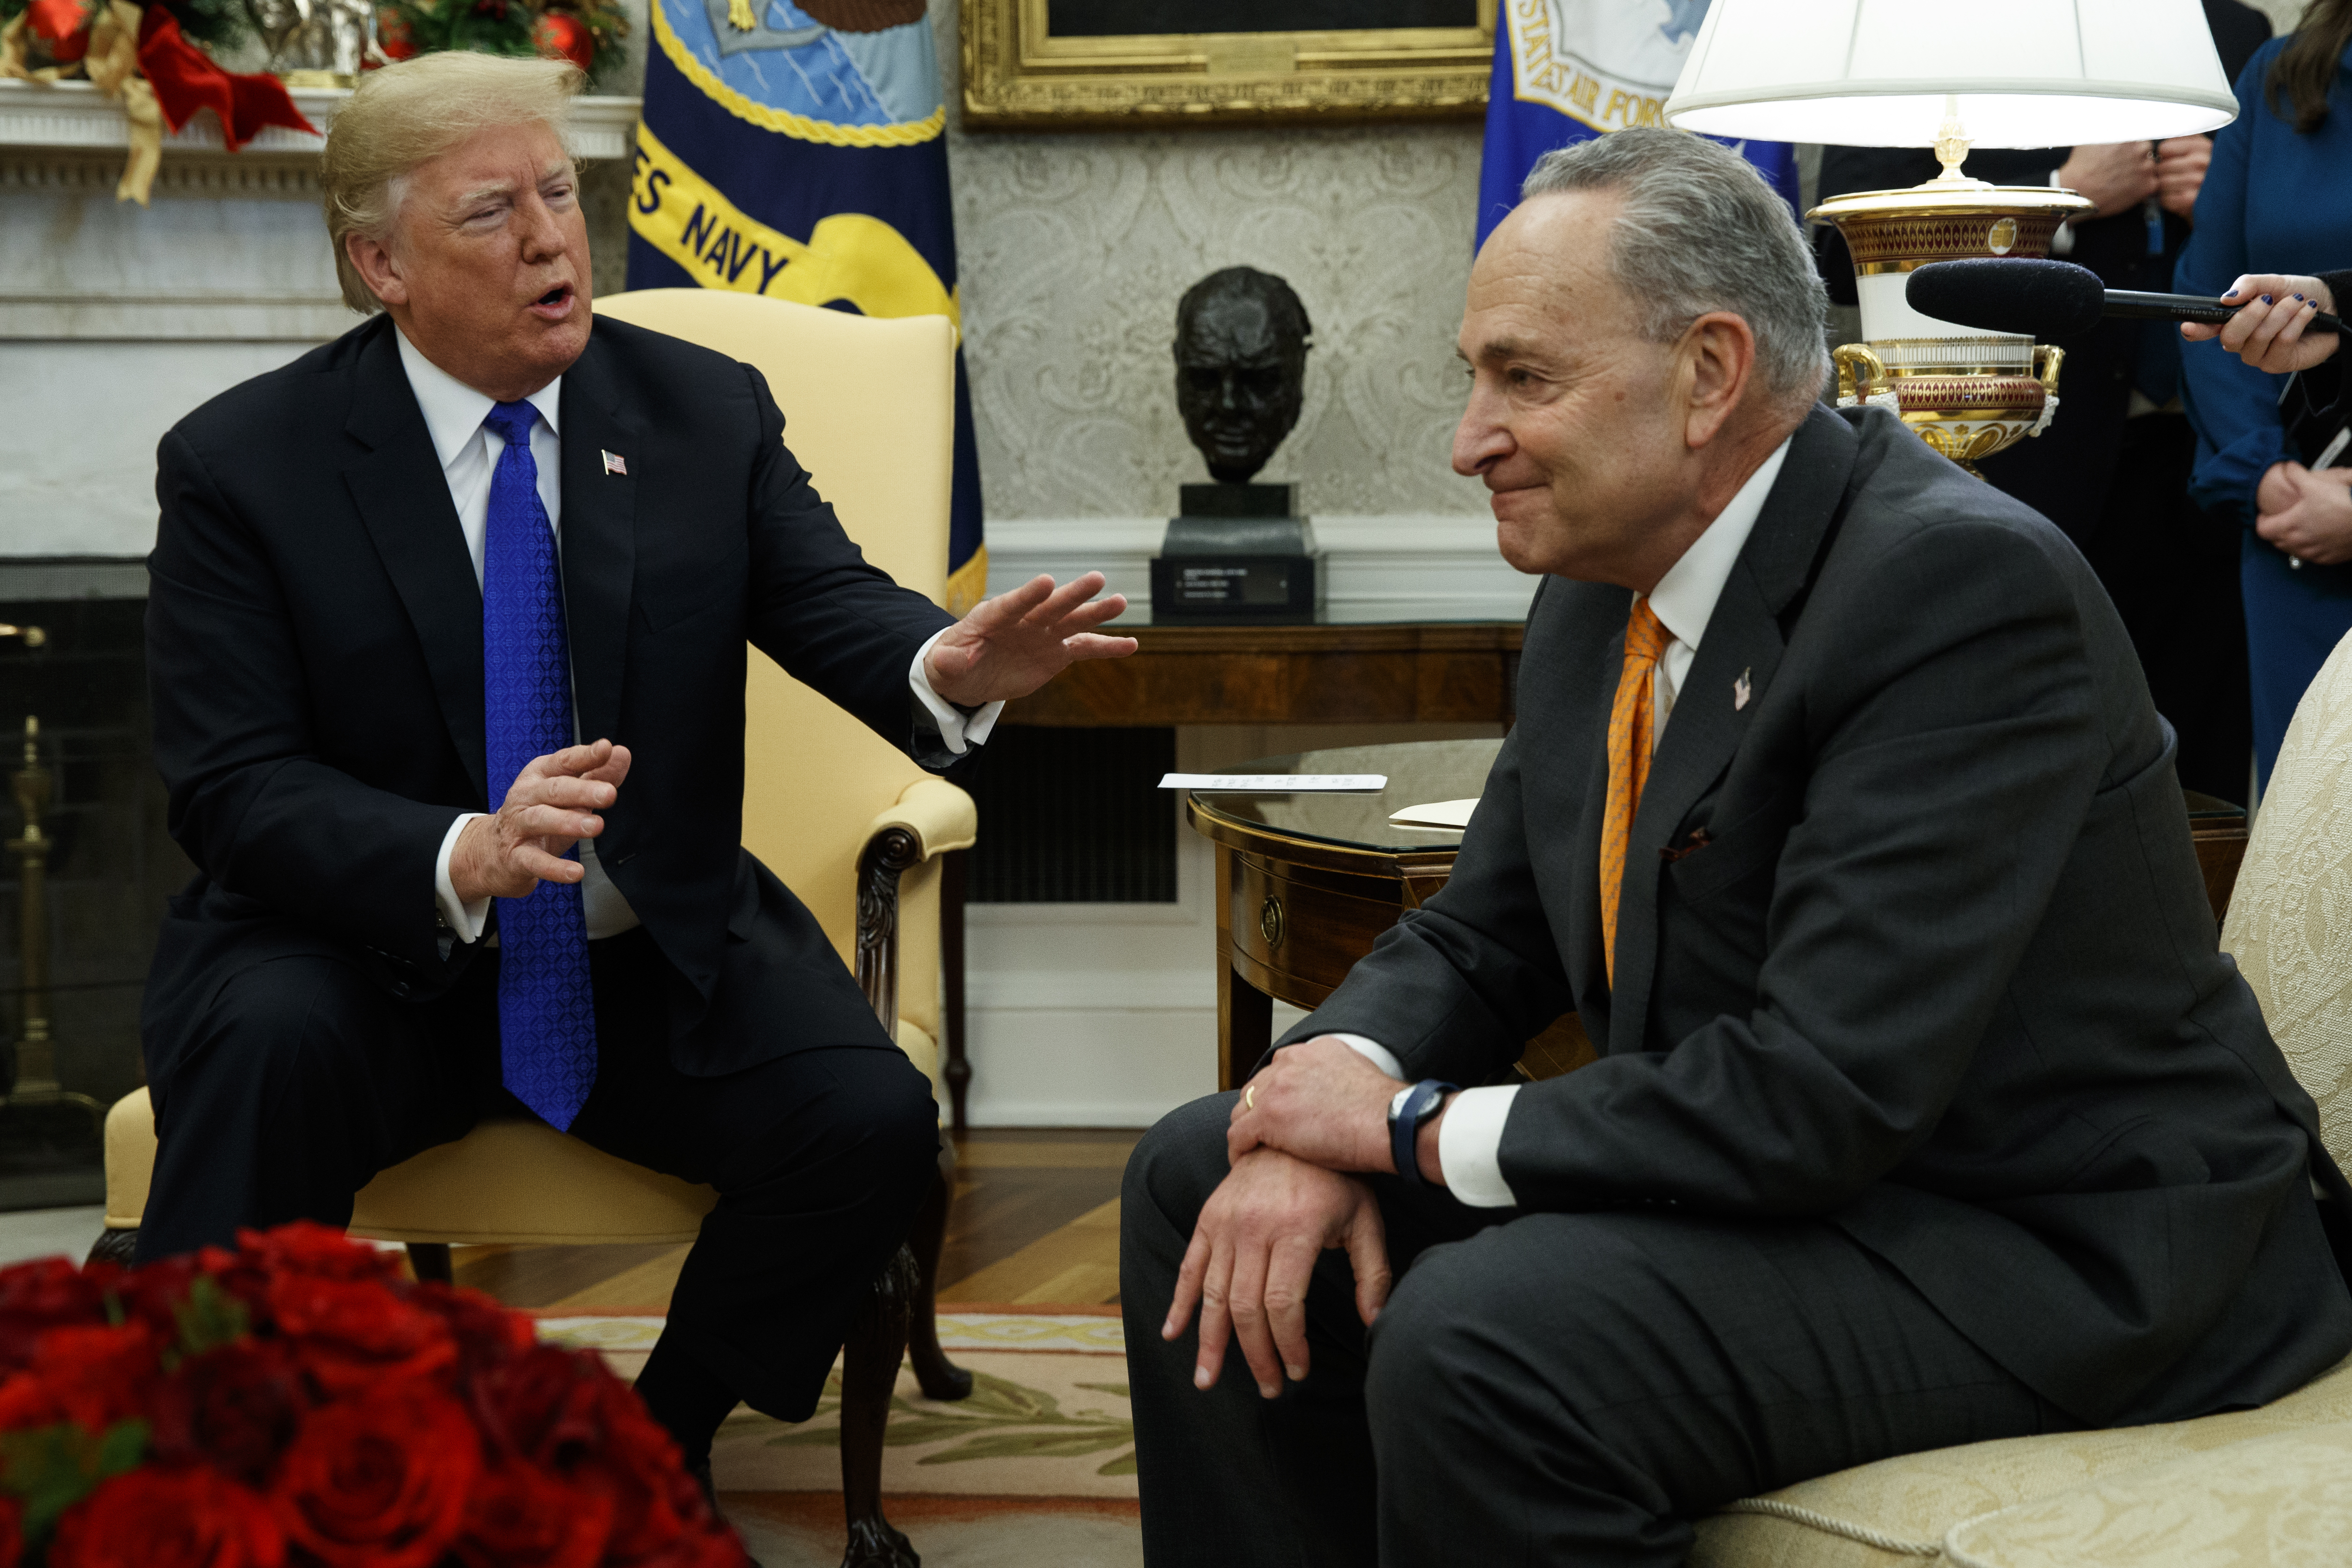 President Donald Trump speaks to Senate Minority Leader Chuck Schumer, D-N.Y., during a meeting with Democratic leadership in the Oval Office of the White House